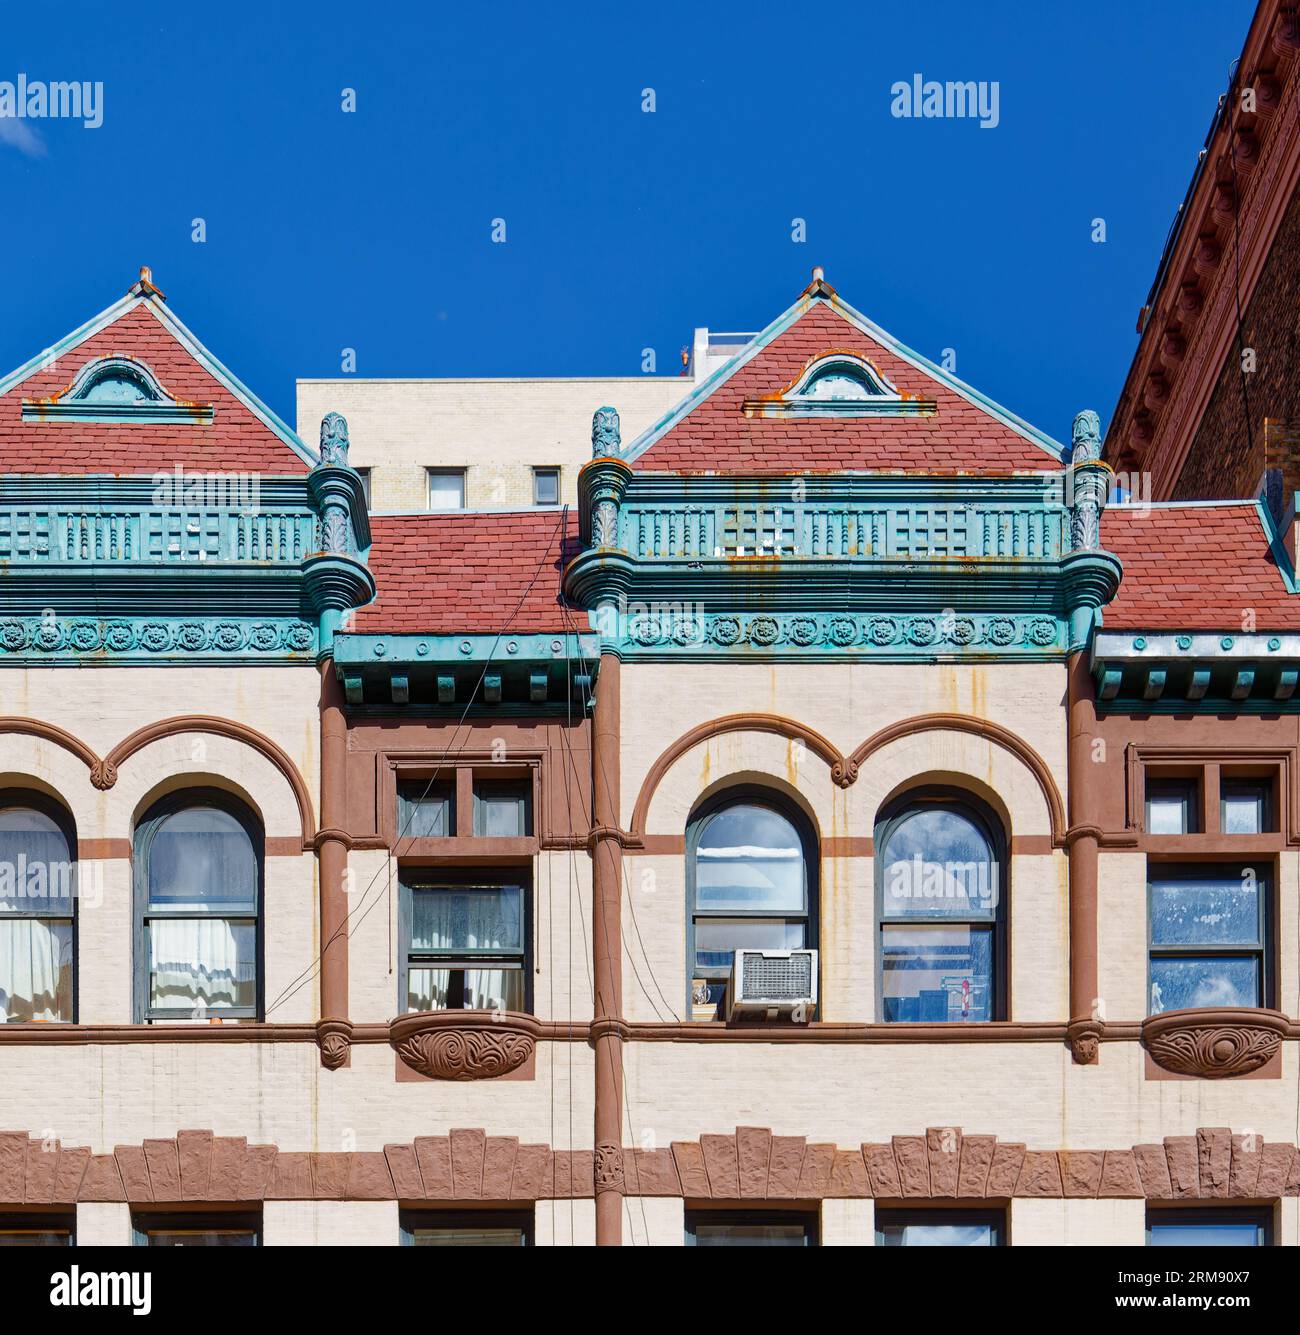 Upper West Side: A fanciful tile roofline fronts the flat roofs of 331 & 329 West 85th Street, landmark Queen Anne-styled row houses built in 1891. Stock Photo